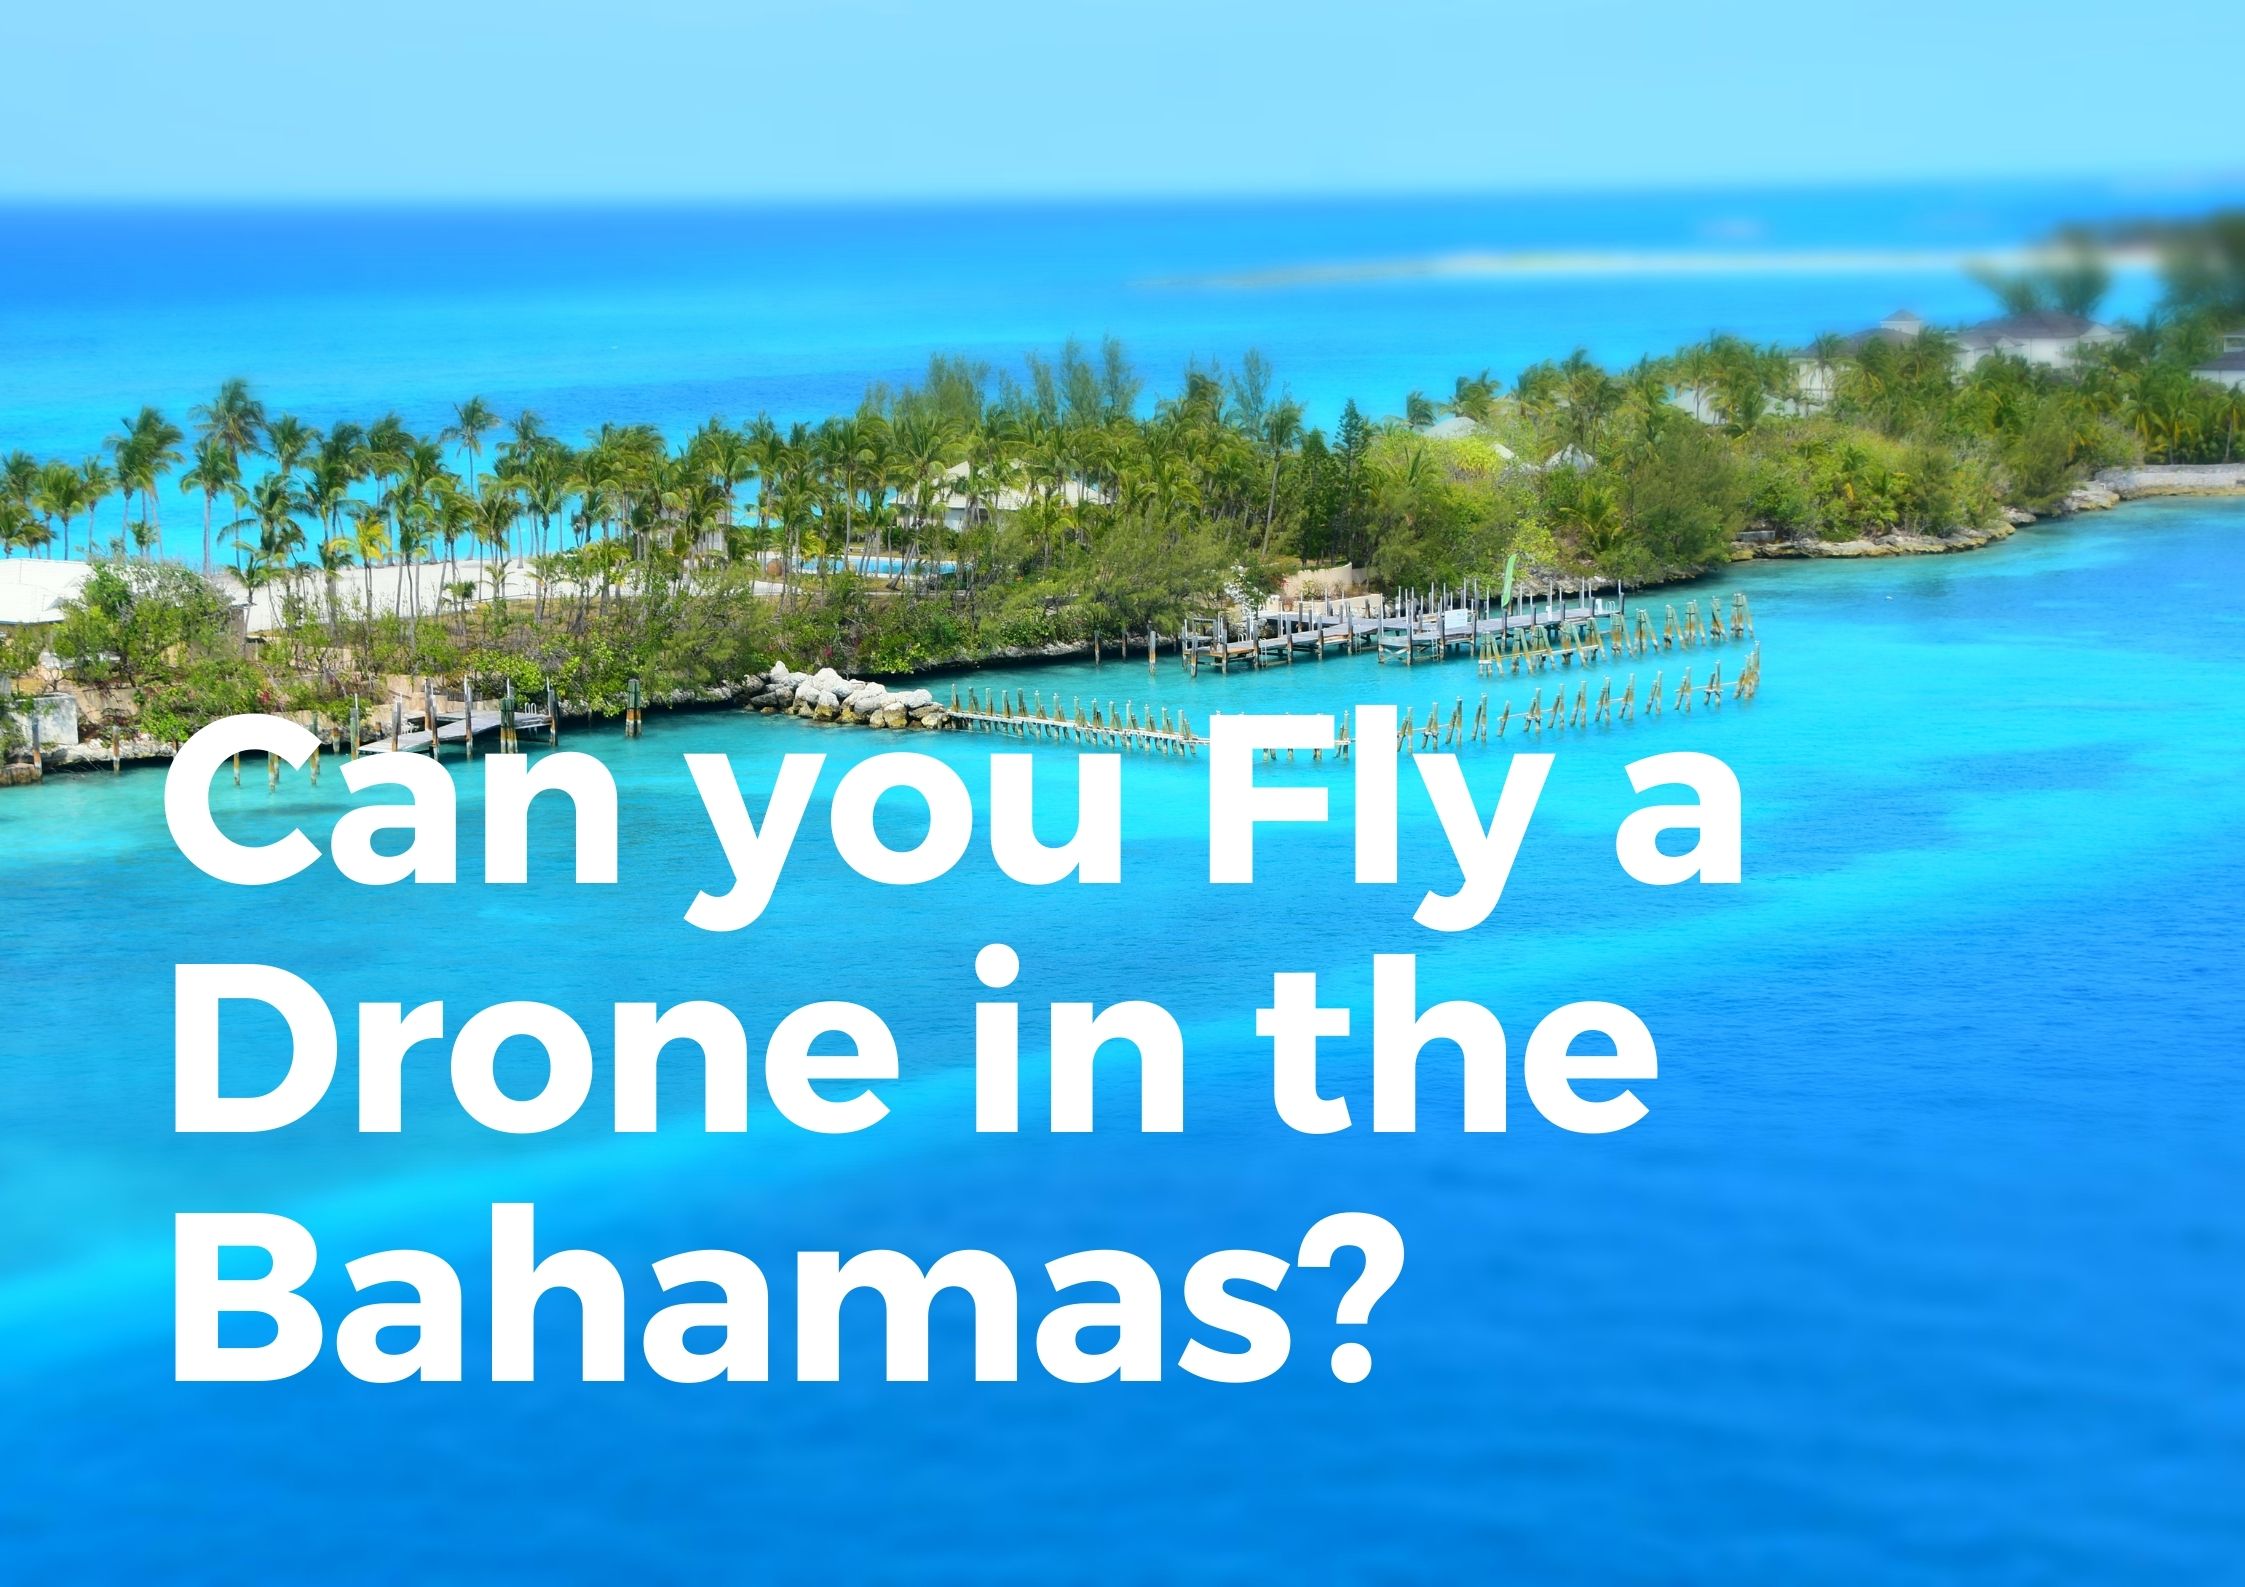 Can you fly a drone in the Bahamas